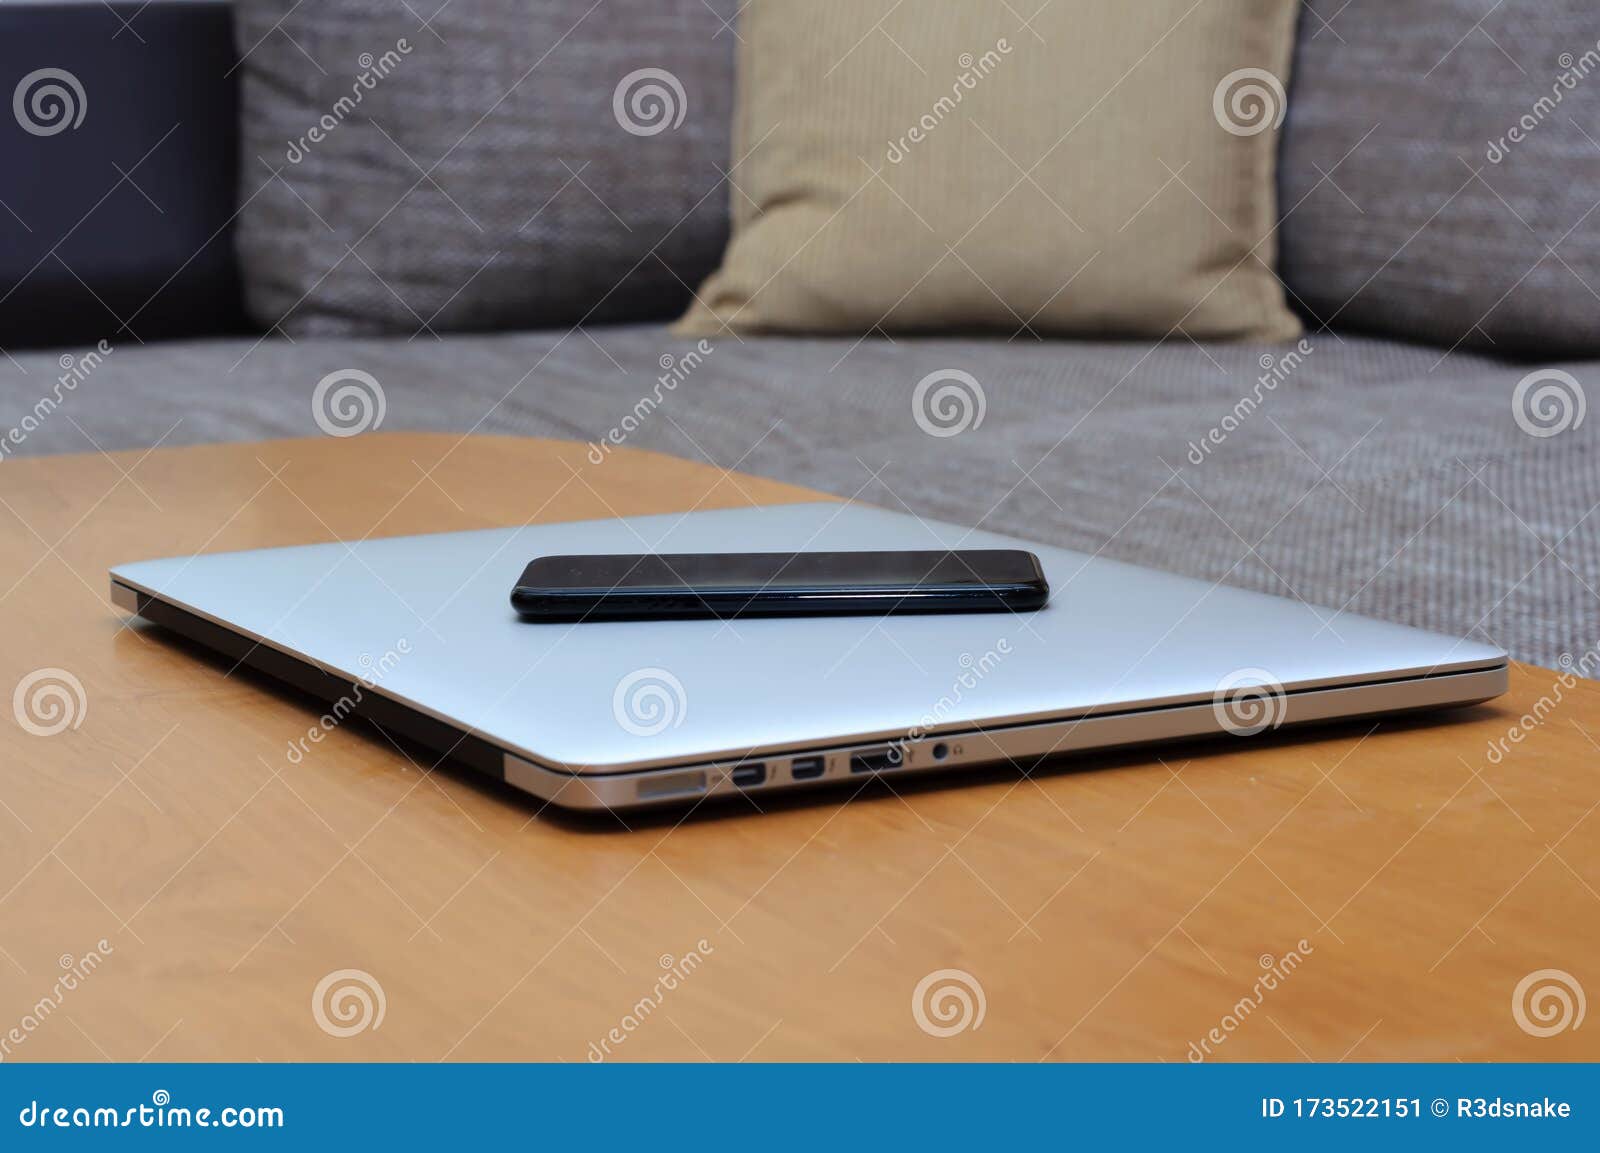 View On A Closed Laptop Pc On A Desk With A Smartphone In A Home